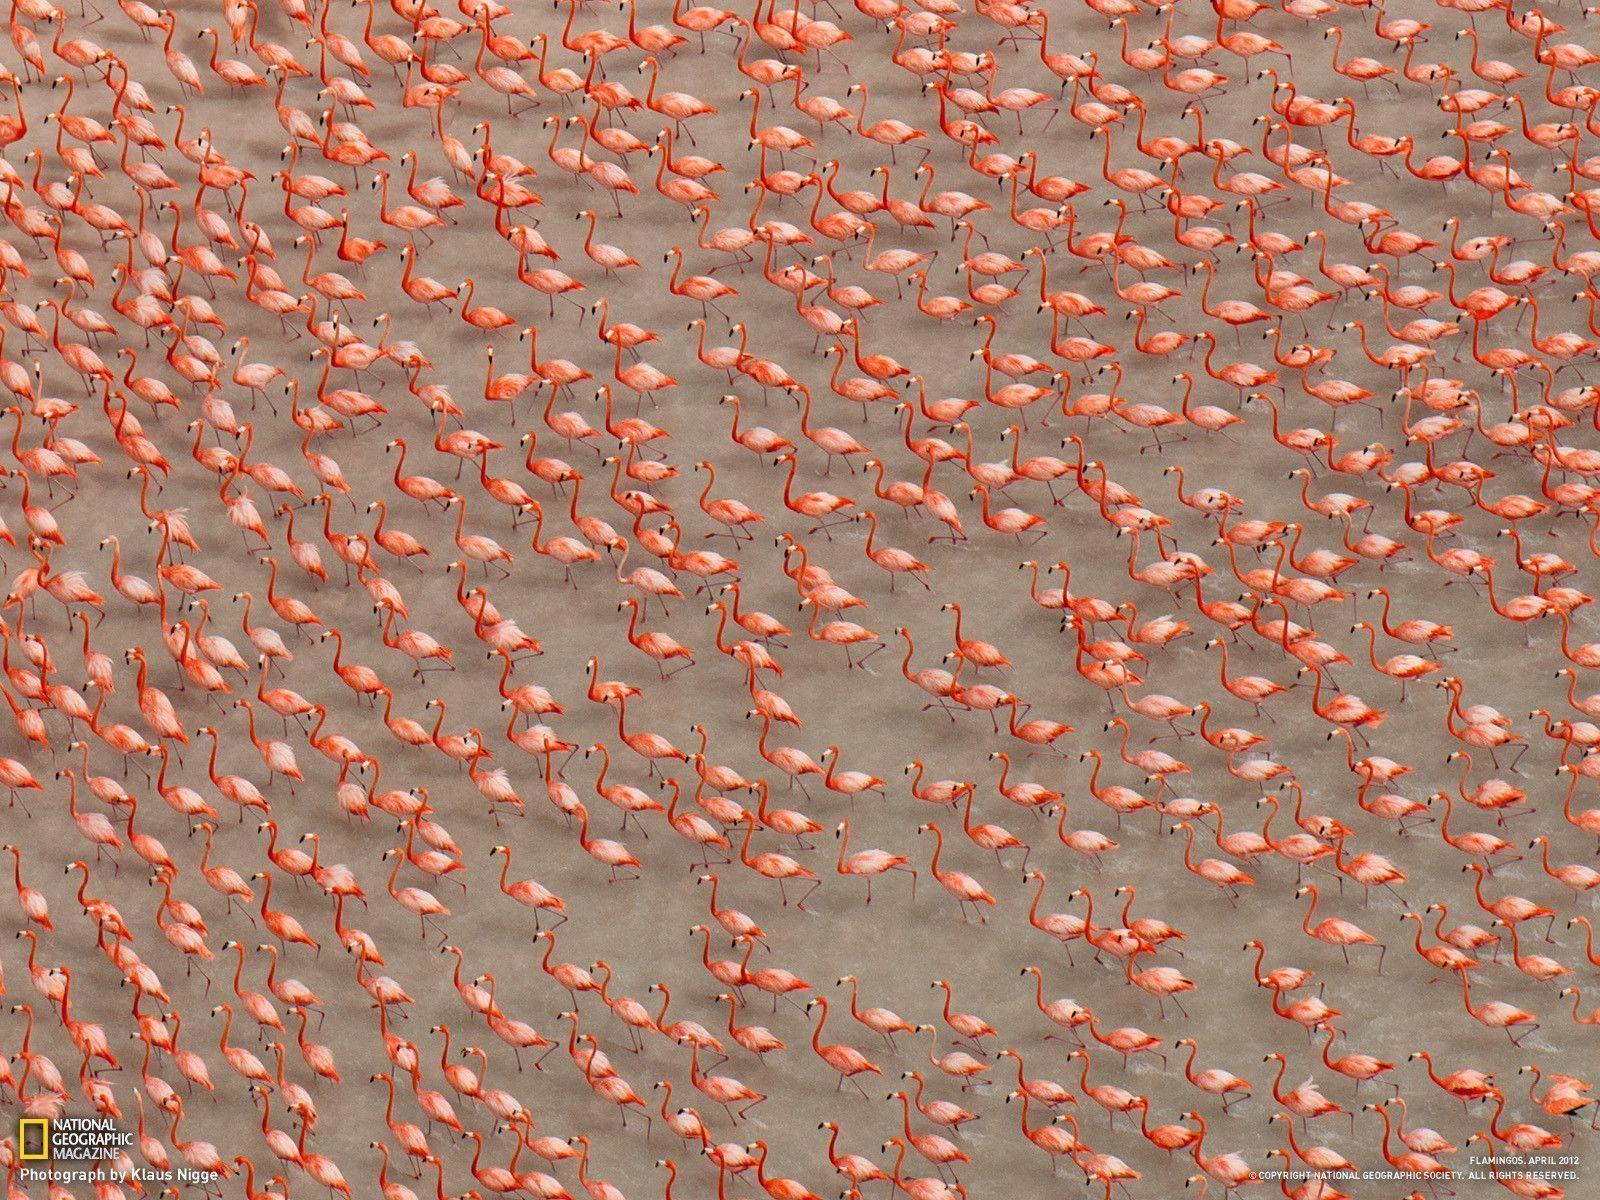 Flamingo Picture - Bird Wallpaper - National Geographic Photo